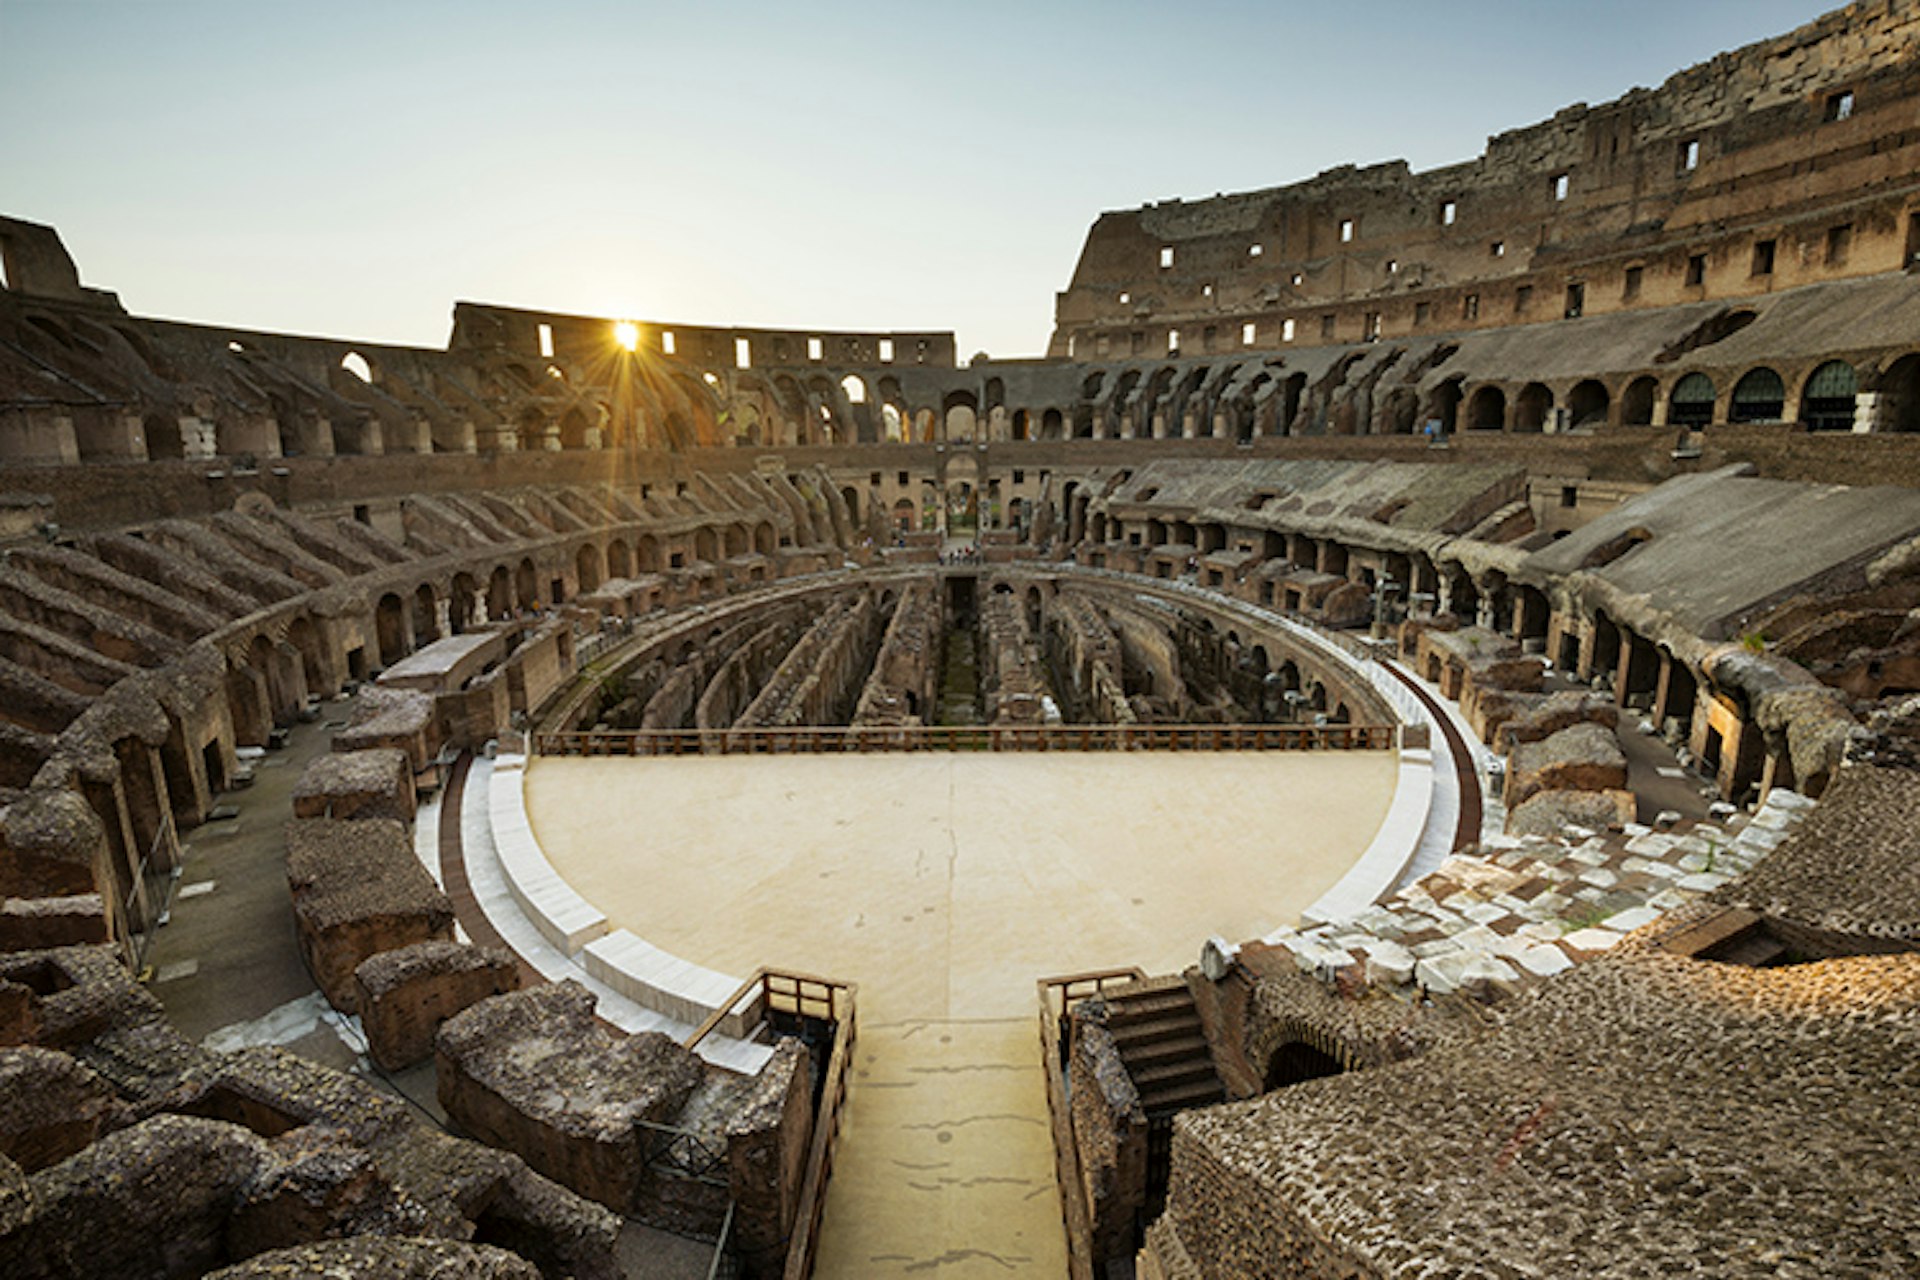 Overview of Colosseum.